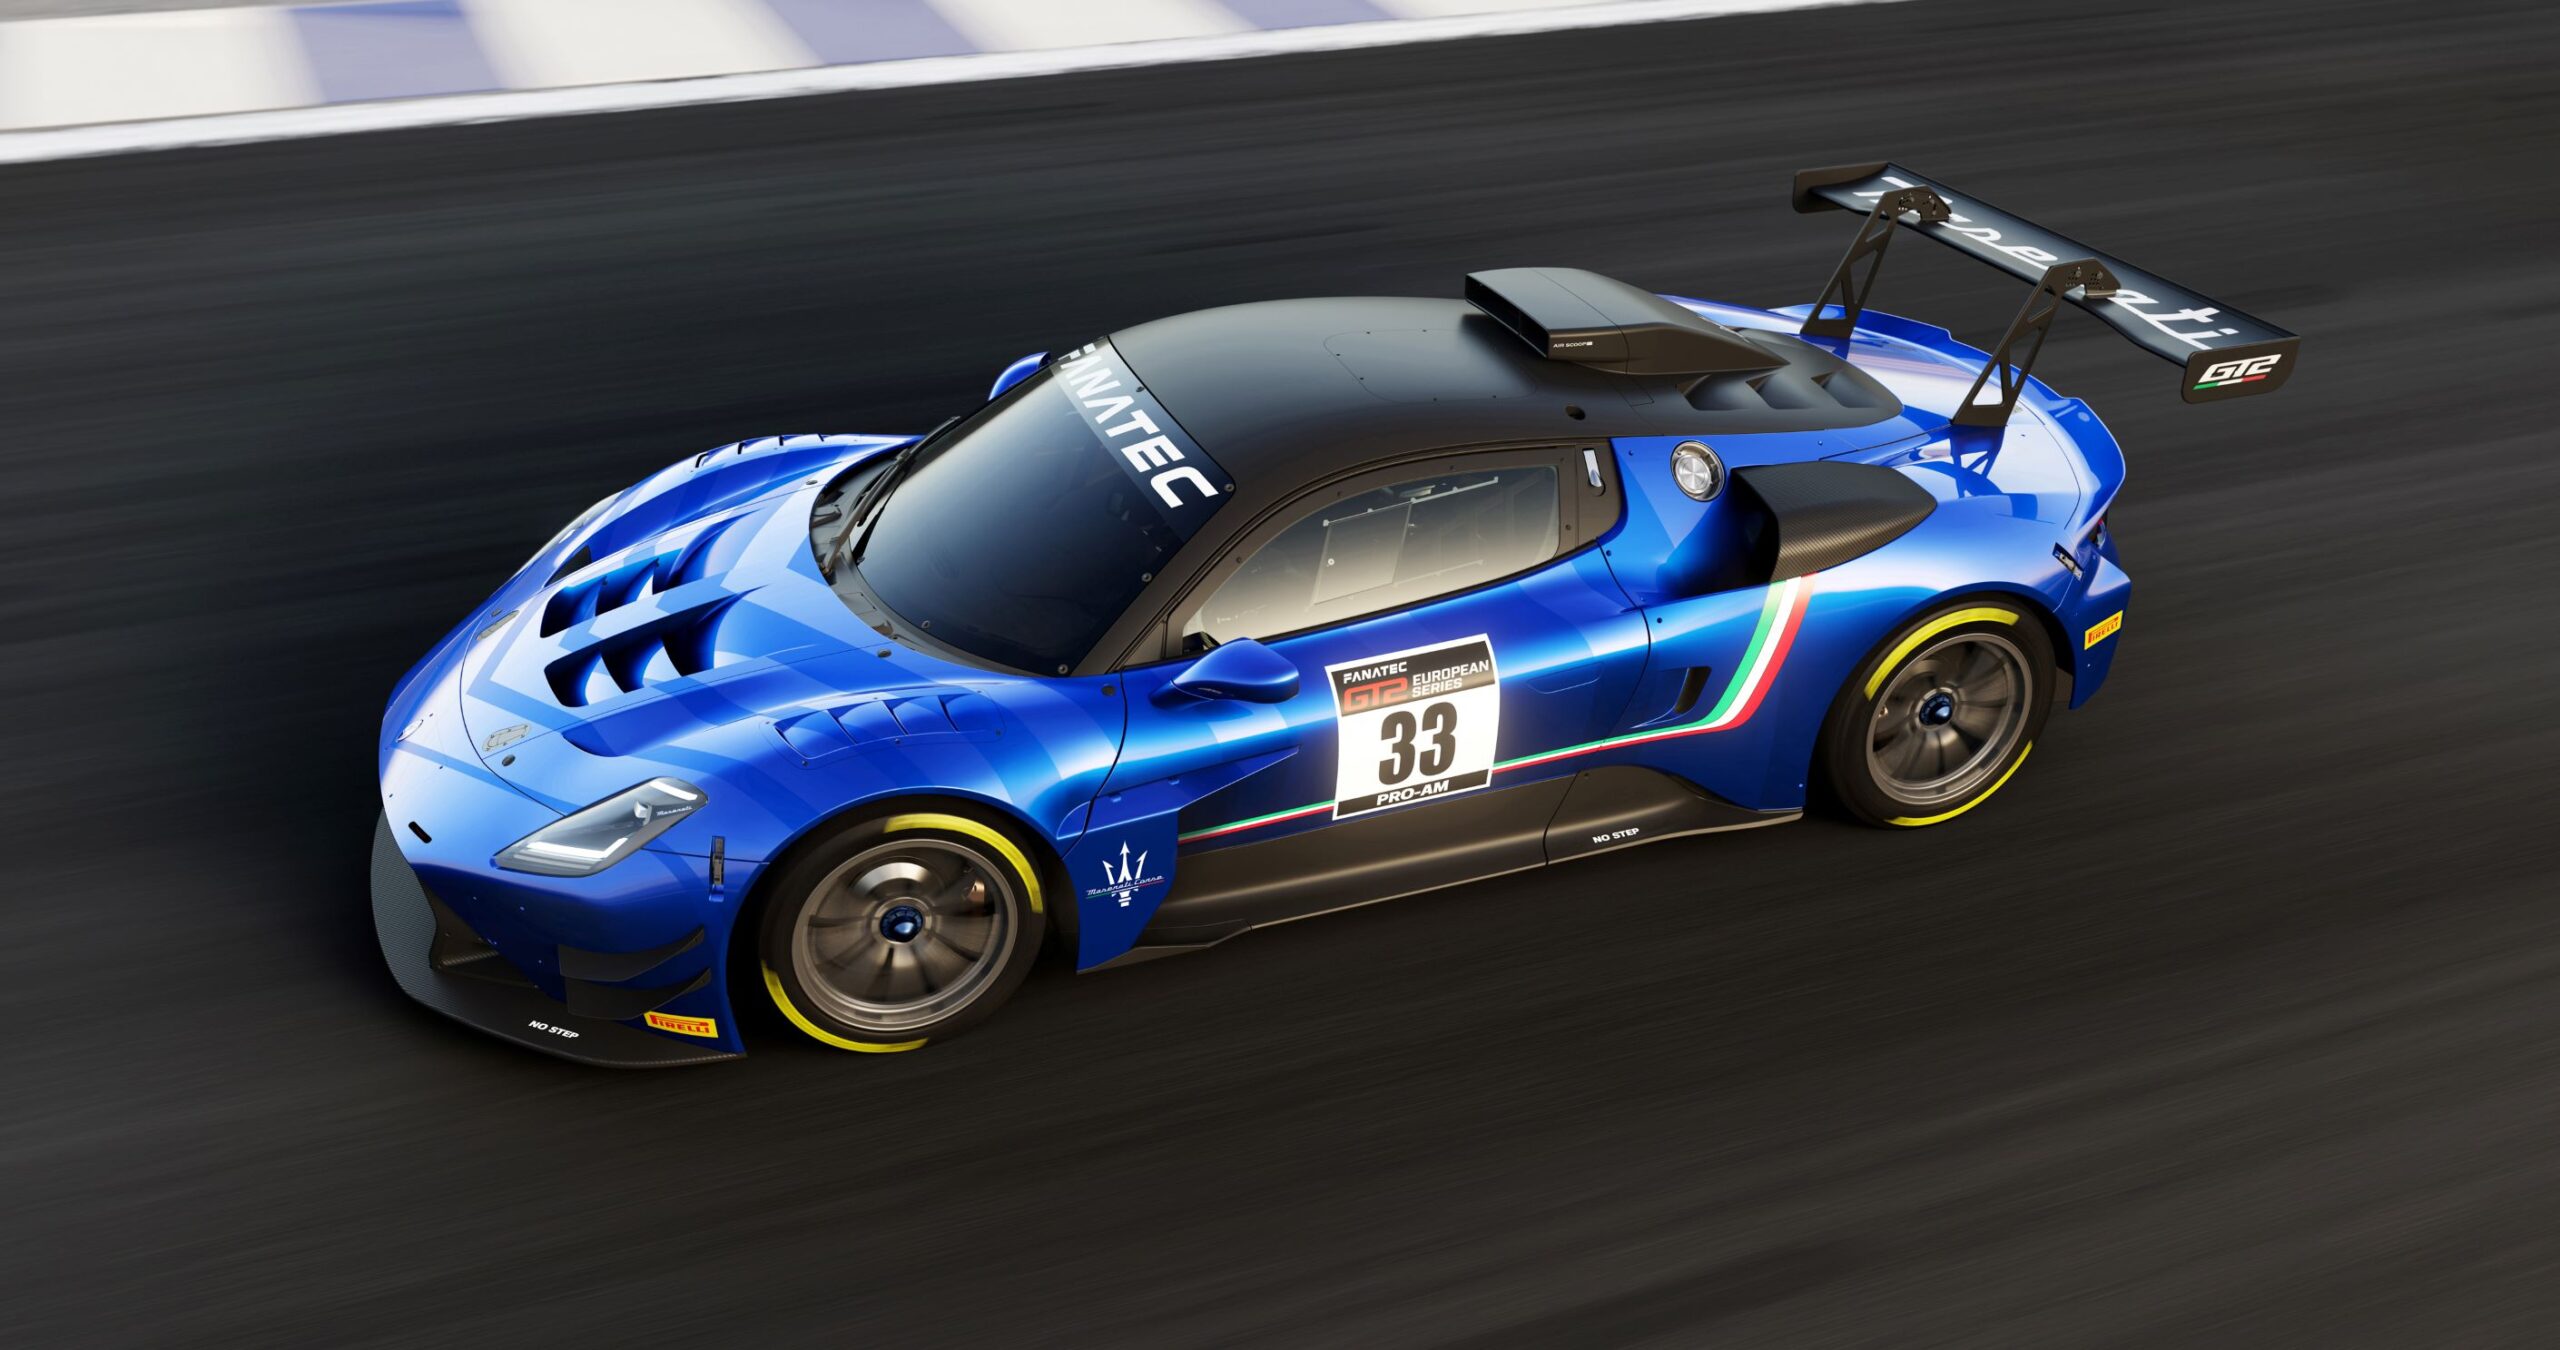 An overhead side view of the new Maserati GT2 racecar in blue